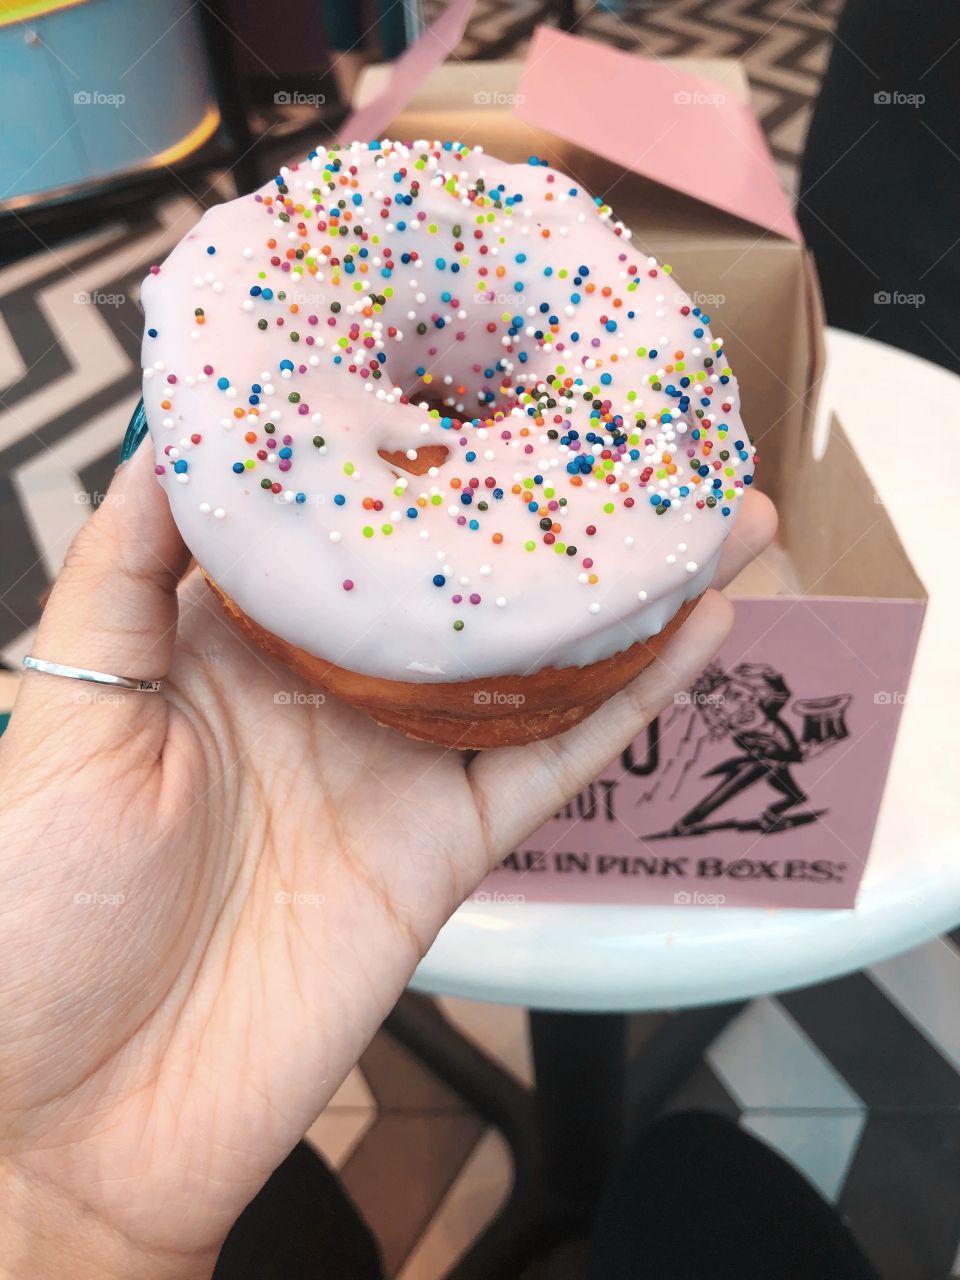 Sweet, tasty, delicious, mouth watering and colorful Vodoo Donuts from Universal City Walk in Orlando! 